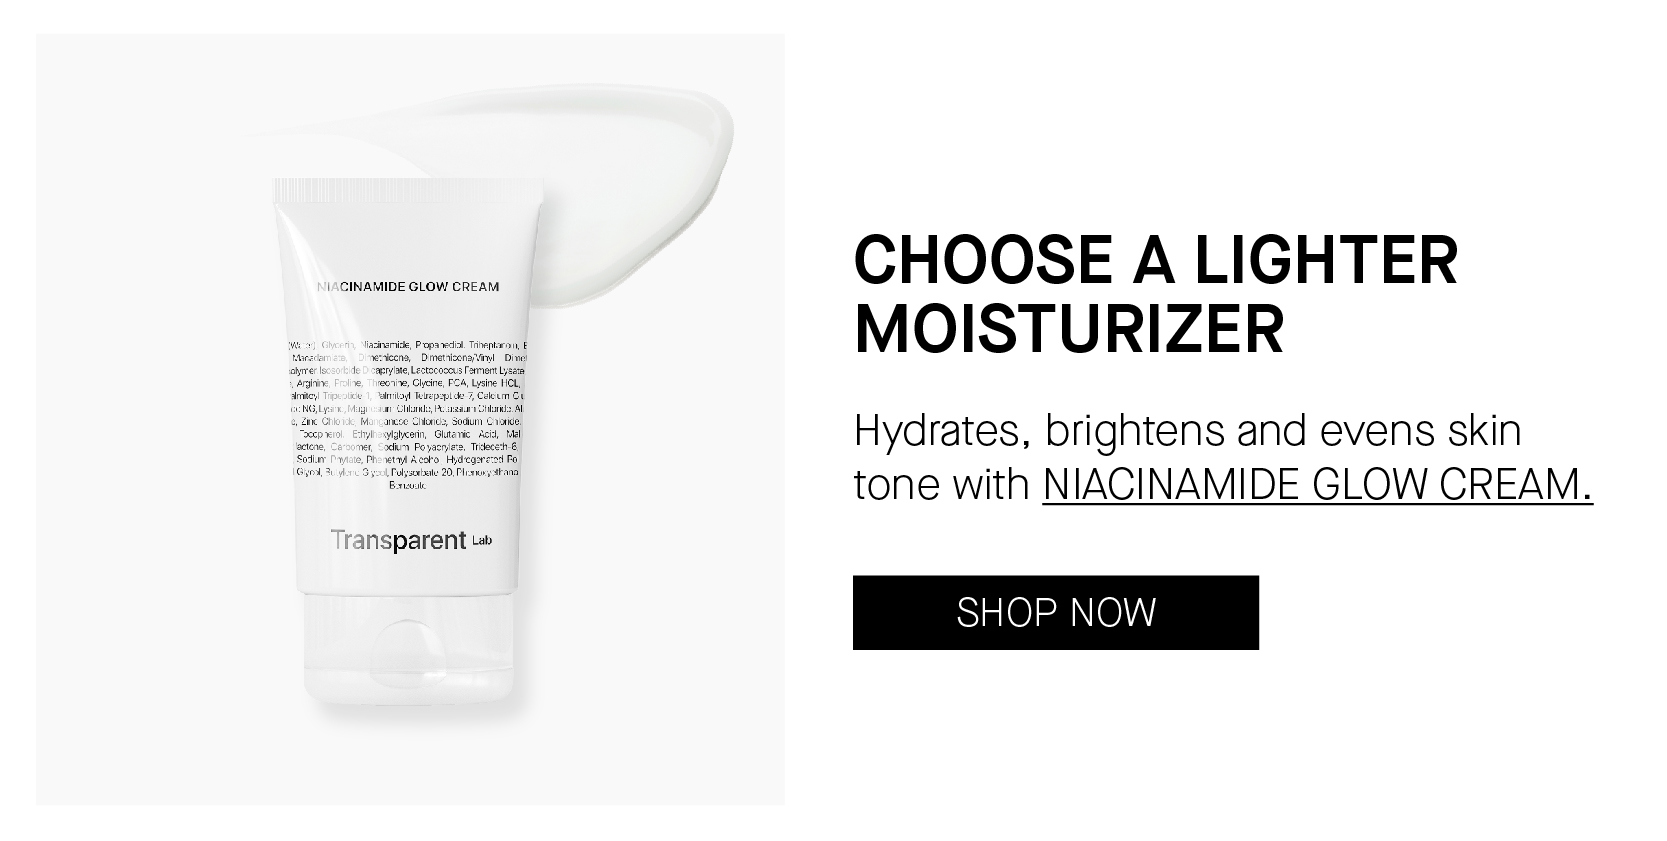 CHOOSE A LIGHTER MOISTURIZER Hydrates, brightens and evens skin tone with NIACINAMIDE GLOW CREAM. nsparent w 